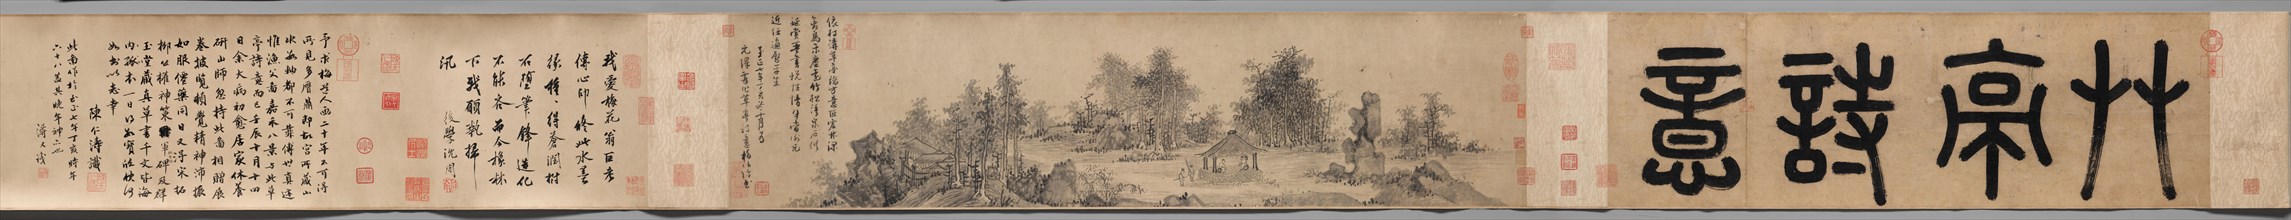 Poetic Feeling in a Thatched Pavilion, 1347. Wu Zhen (Chinese, 1280-1354). Handscroll, ink on